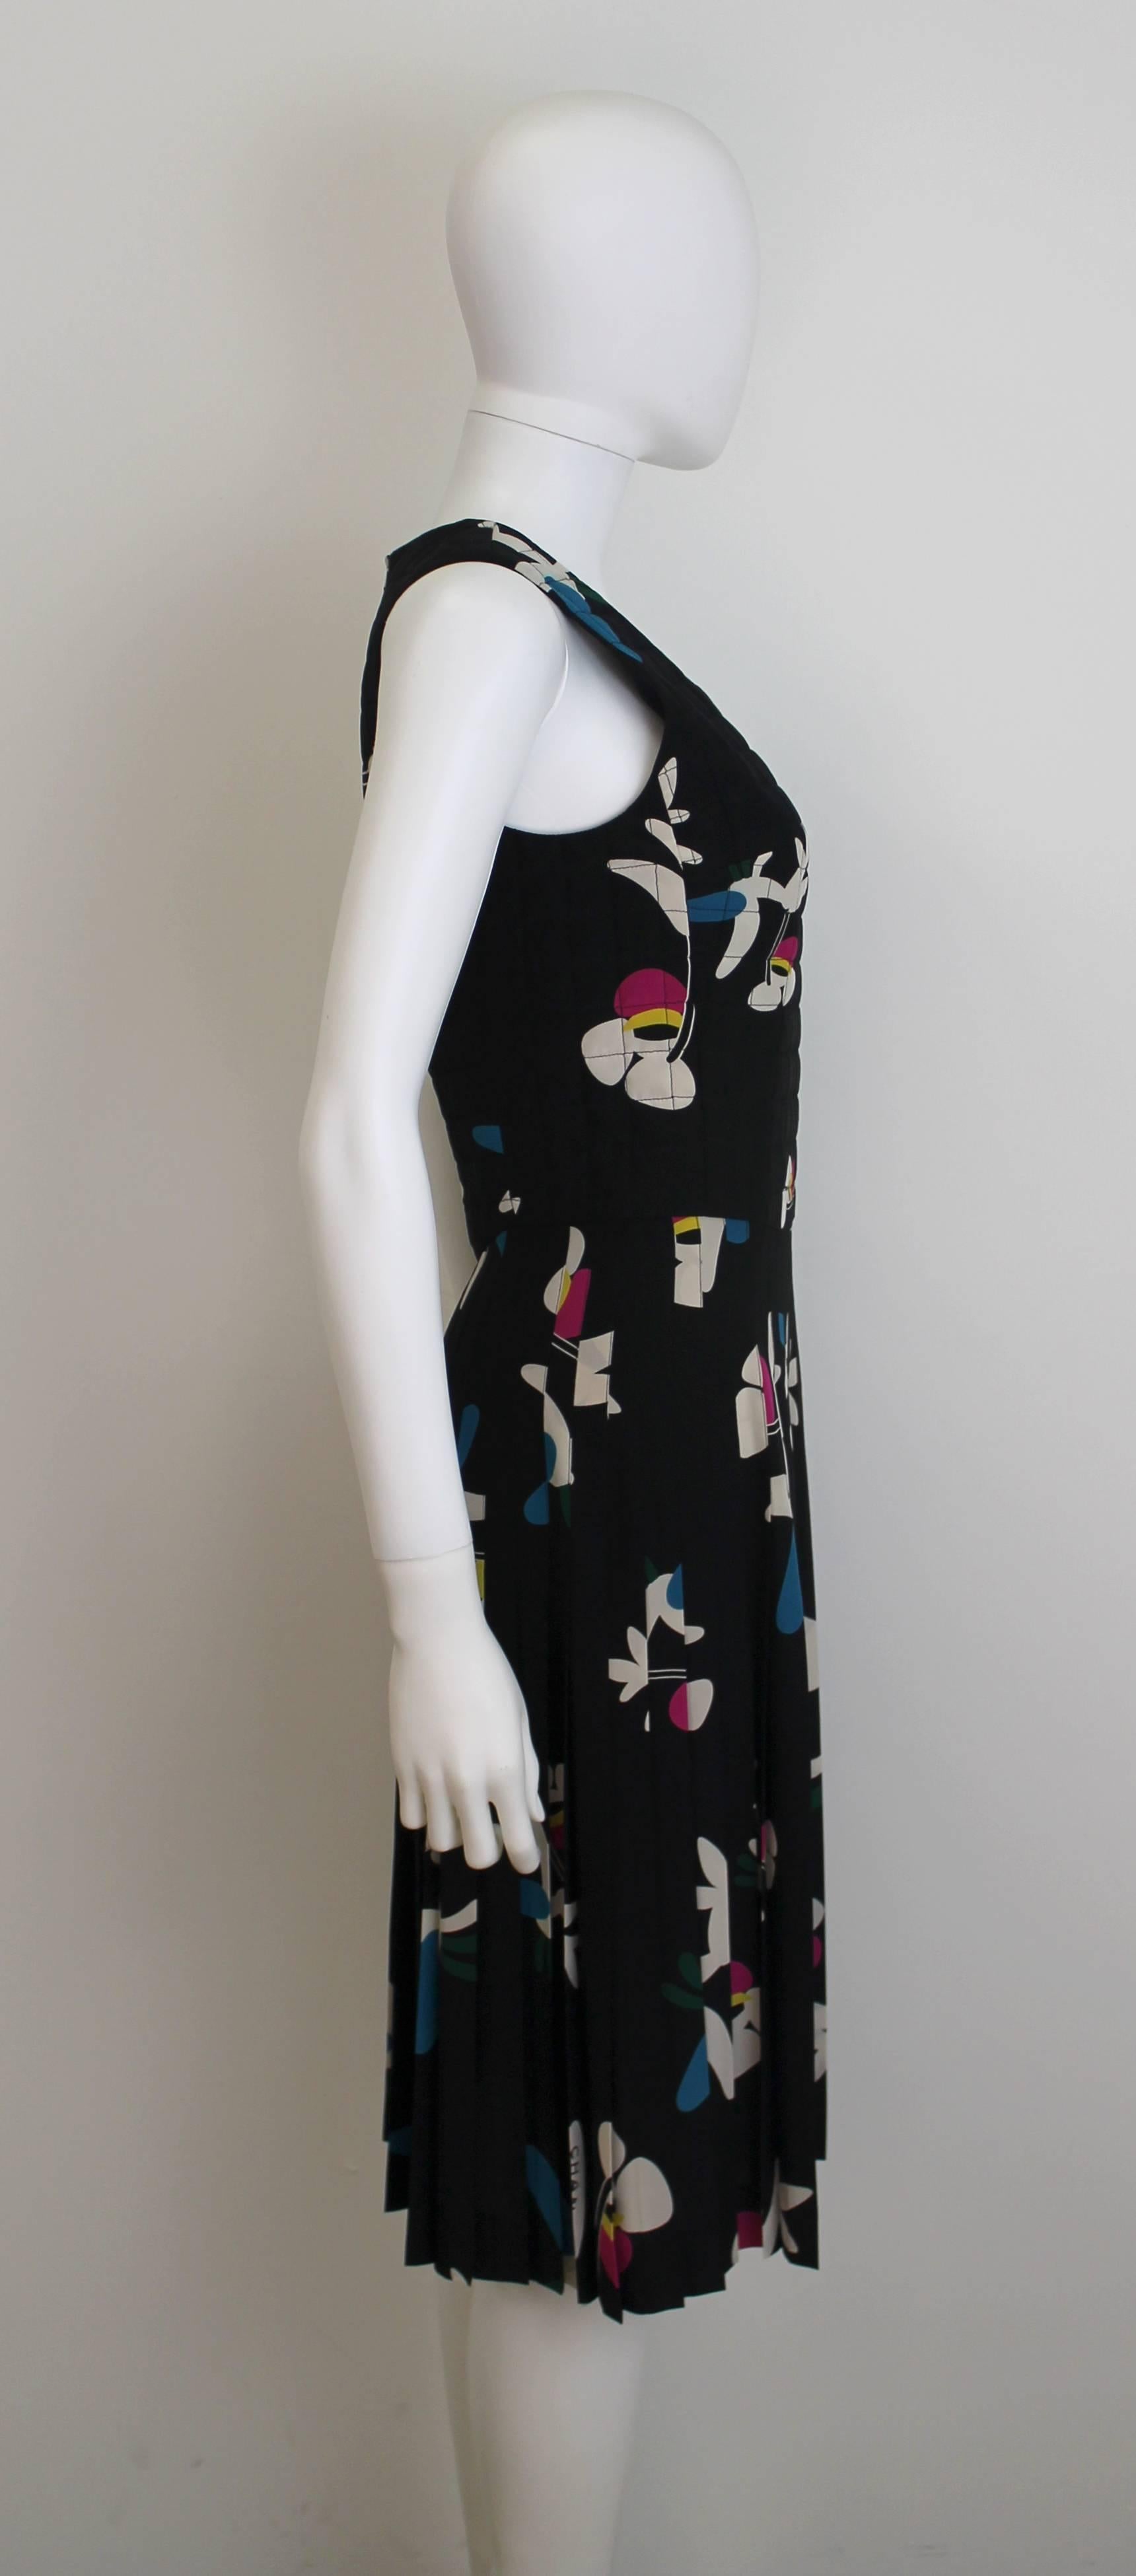 Chanel printed dress from Spring/Summer 2001 with an abstract floral print in pink, white and blue. Features quilted bodice and pleated skirt.